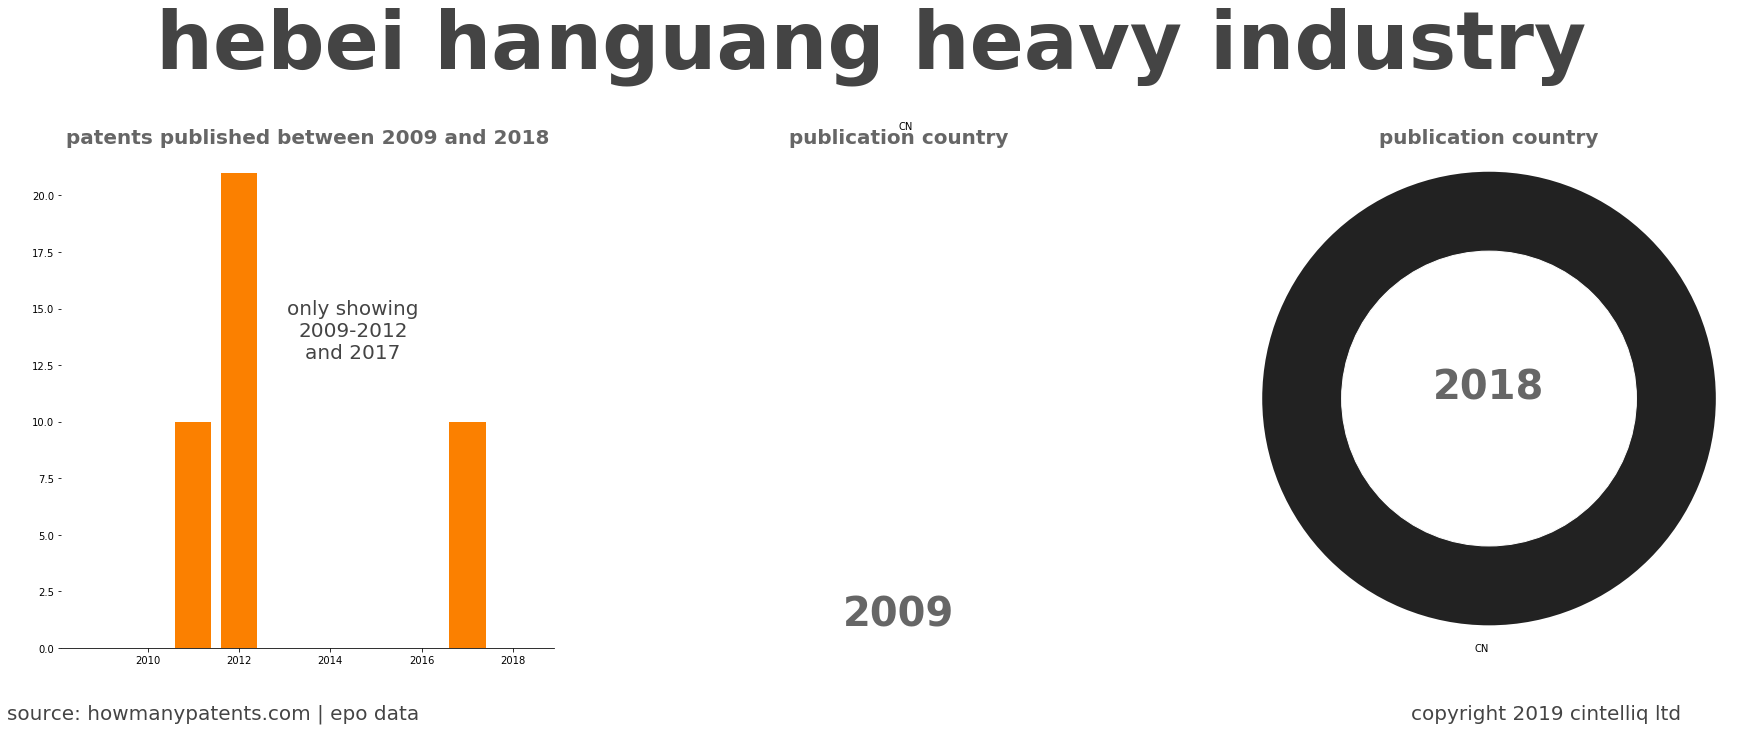 summary of patents for Hebei Hanguang Heavy Industry